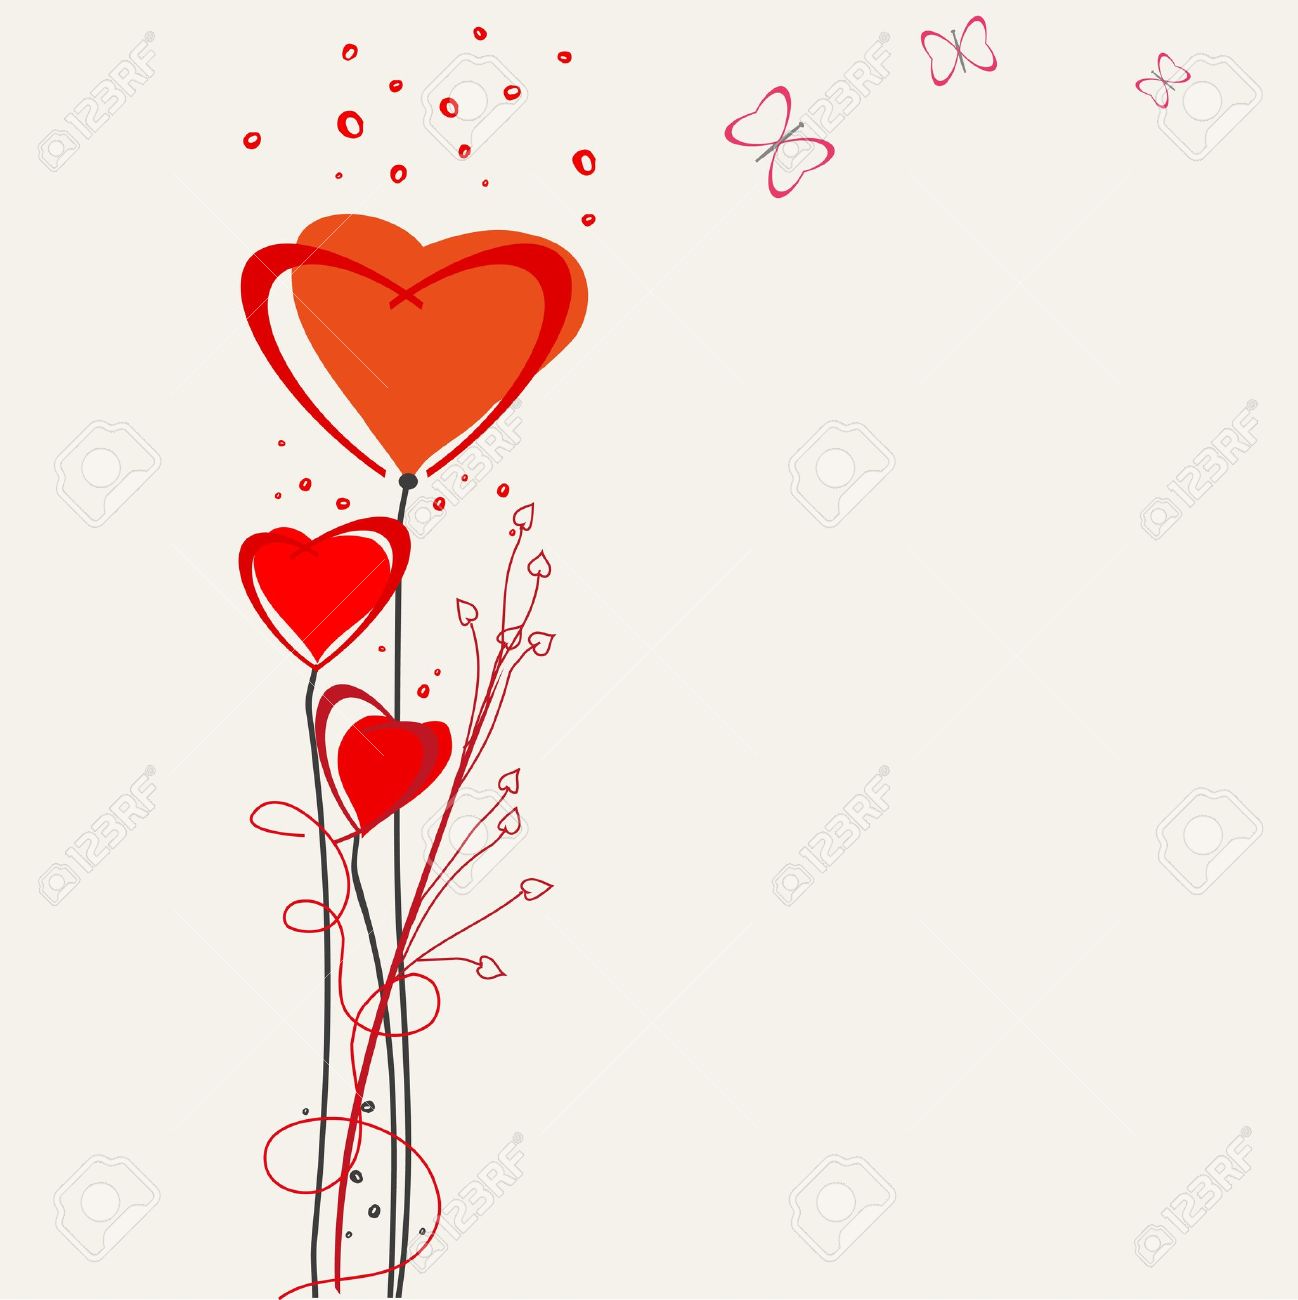 Romantic Valentine Backgrounds Valentines Day Royalty Free